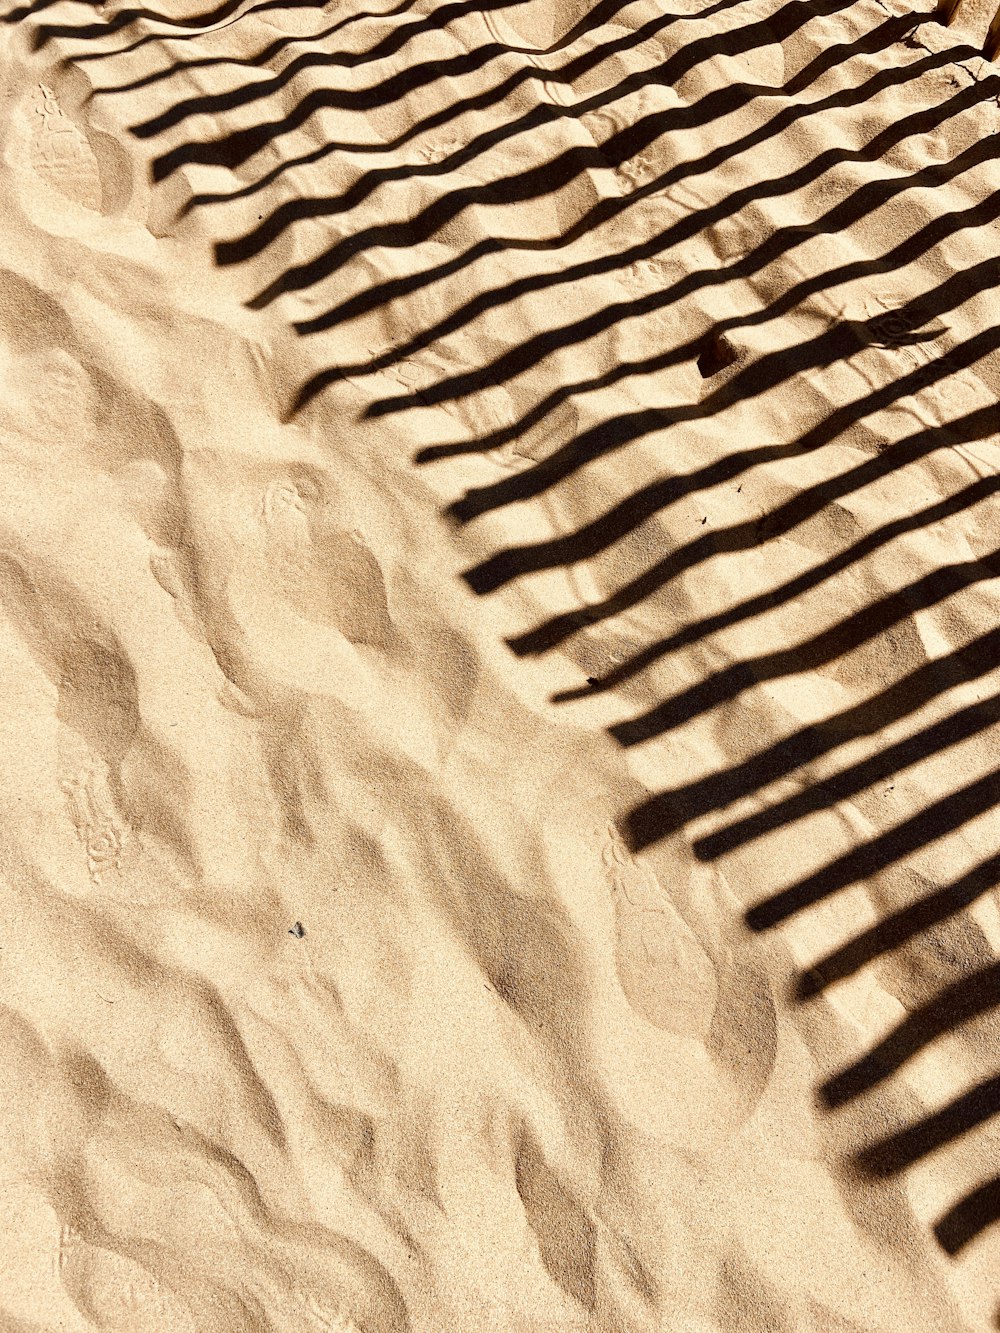 the shadow of a bench on a sandy beach